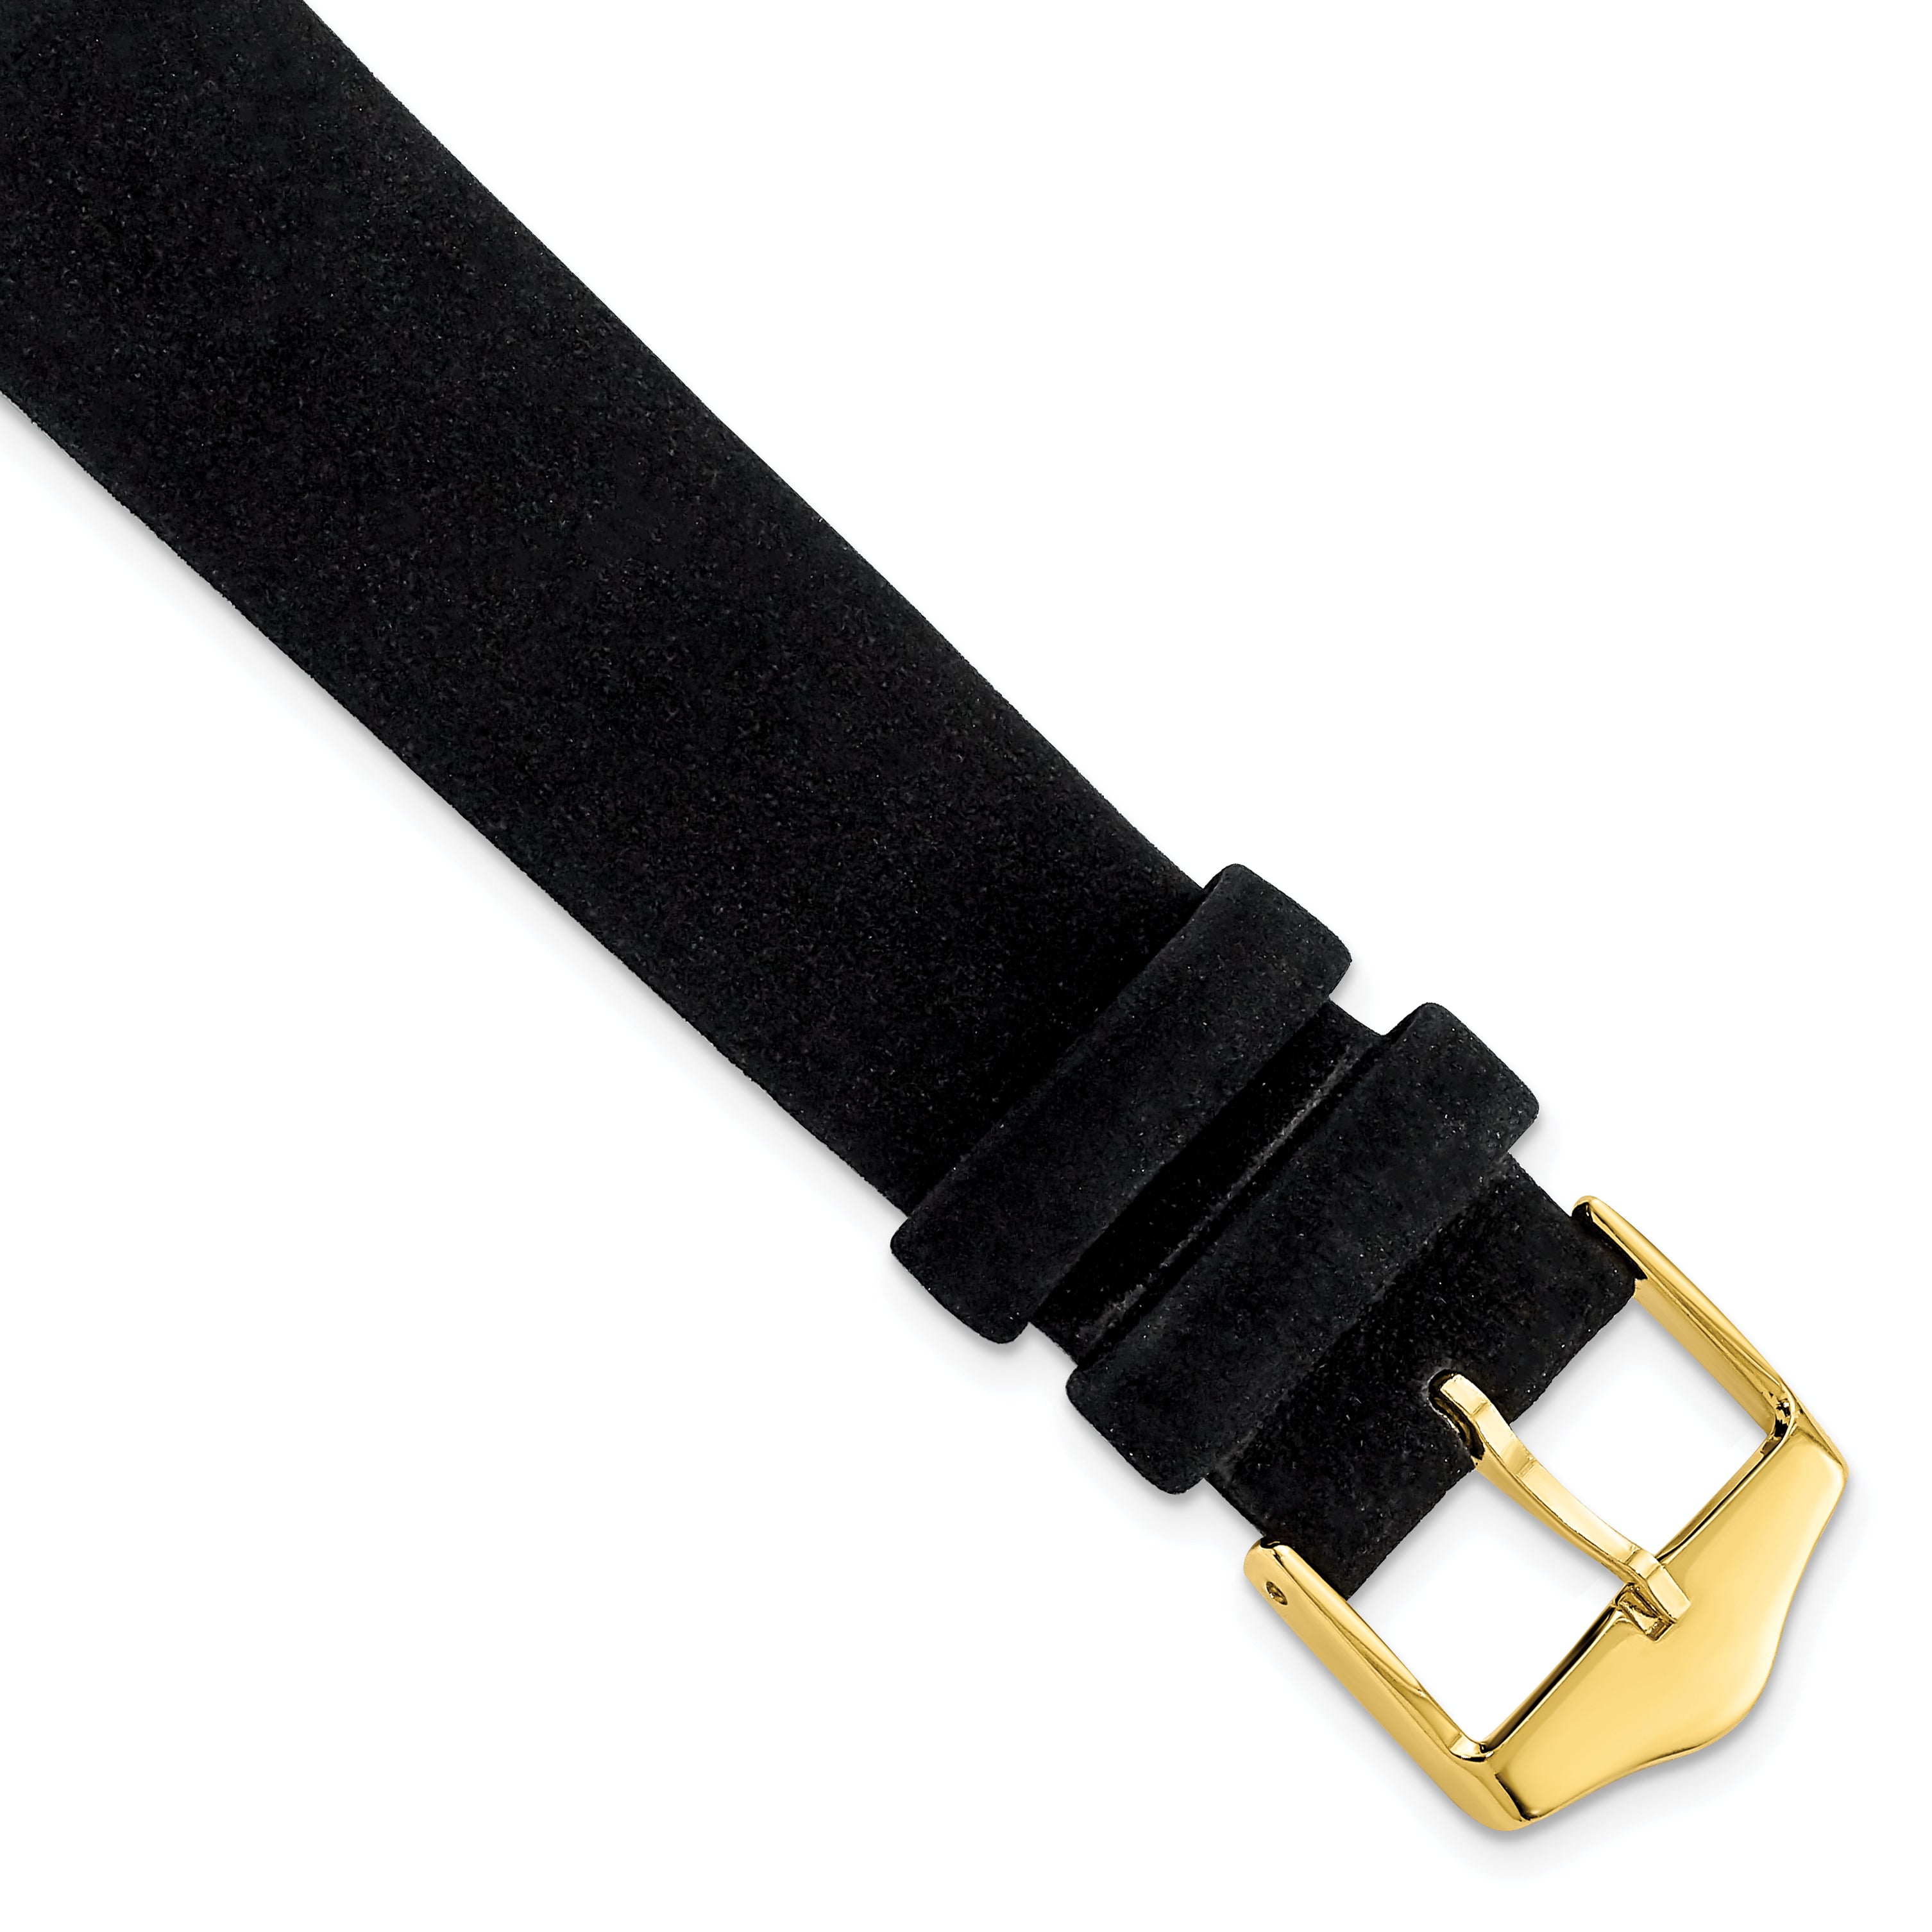 DeBeer 18mm Black Suede Flat Leather with Gold-tone Buckle 7.75 inch Watch Band